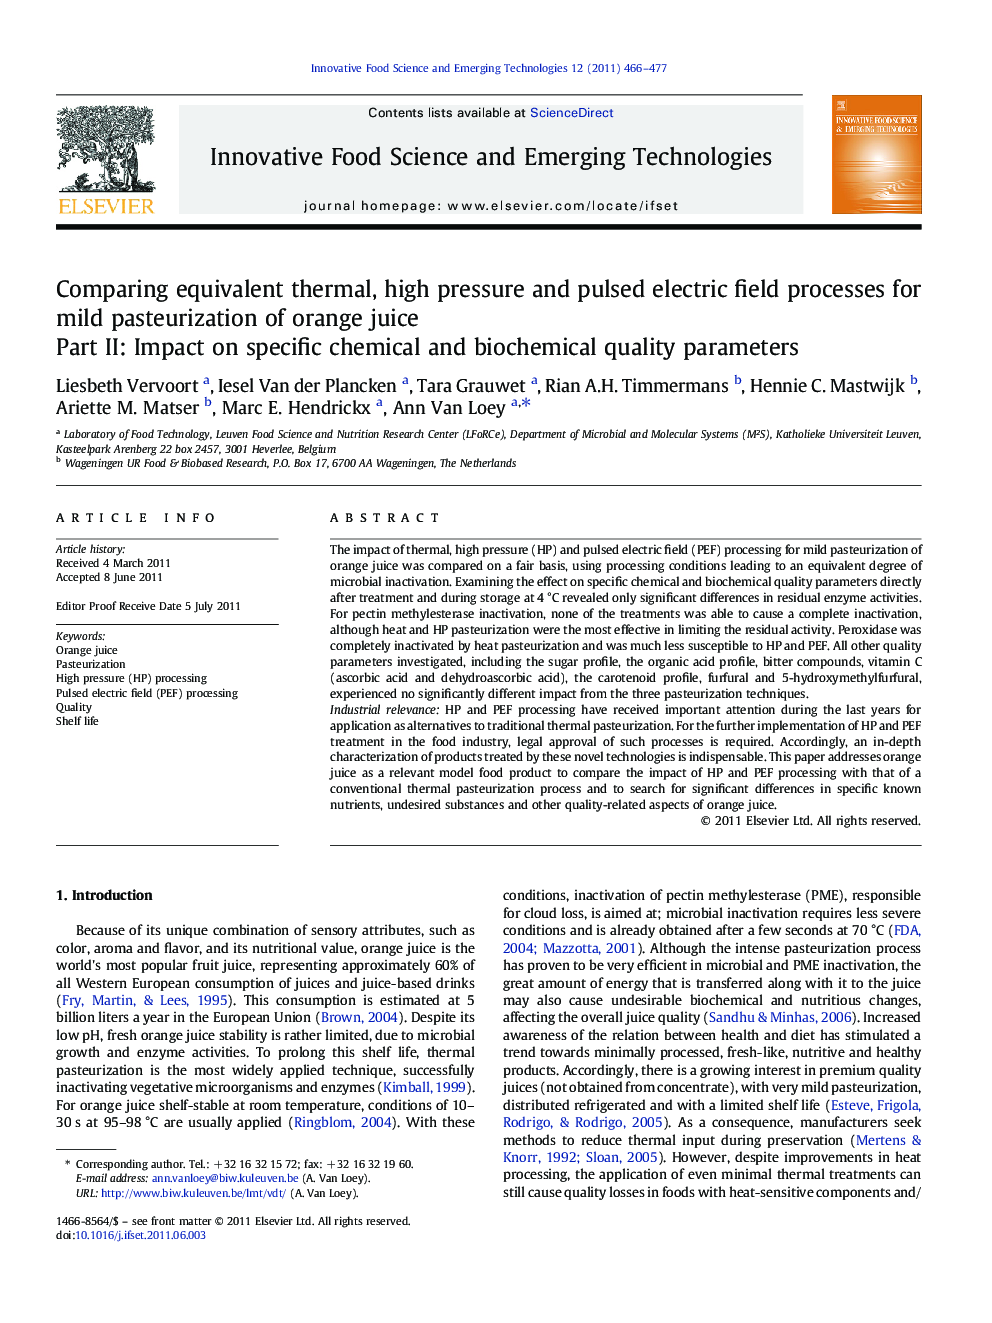 Comparing equivalent thermal, high pressure and pulsed electric field processes for mild pasteurization of orange juice: Part II: Impact on specific chemical and biochemical quality parameters